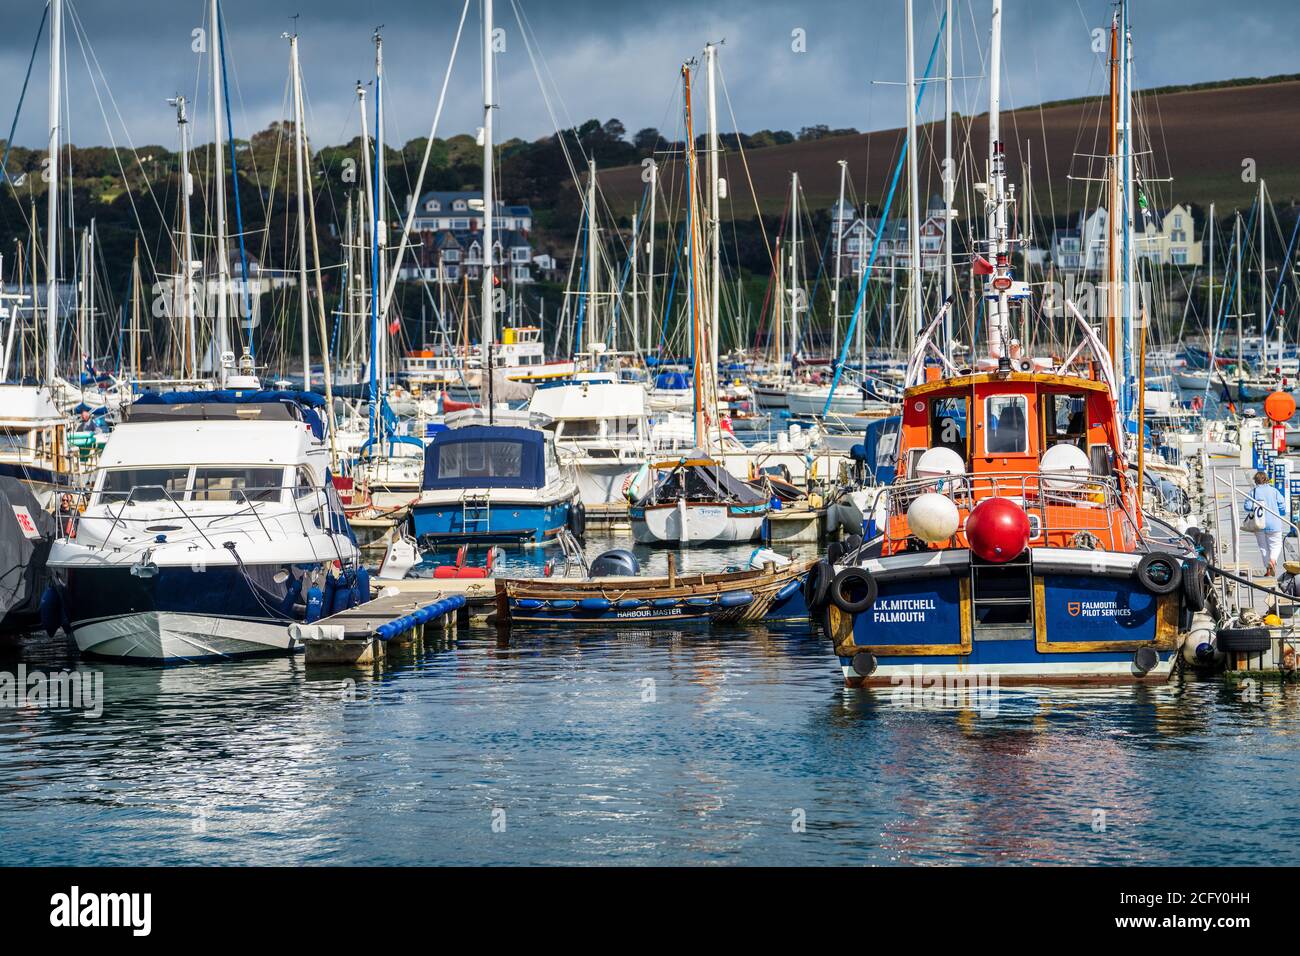 Falmouth Marina in Falmouth Harbour Cornwall UK.  Small craft are moored in the marina close to Falmouth town centre. Stock Photo